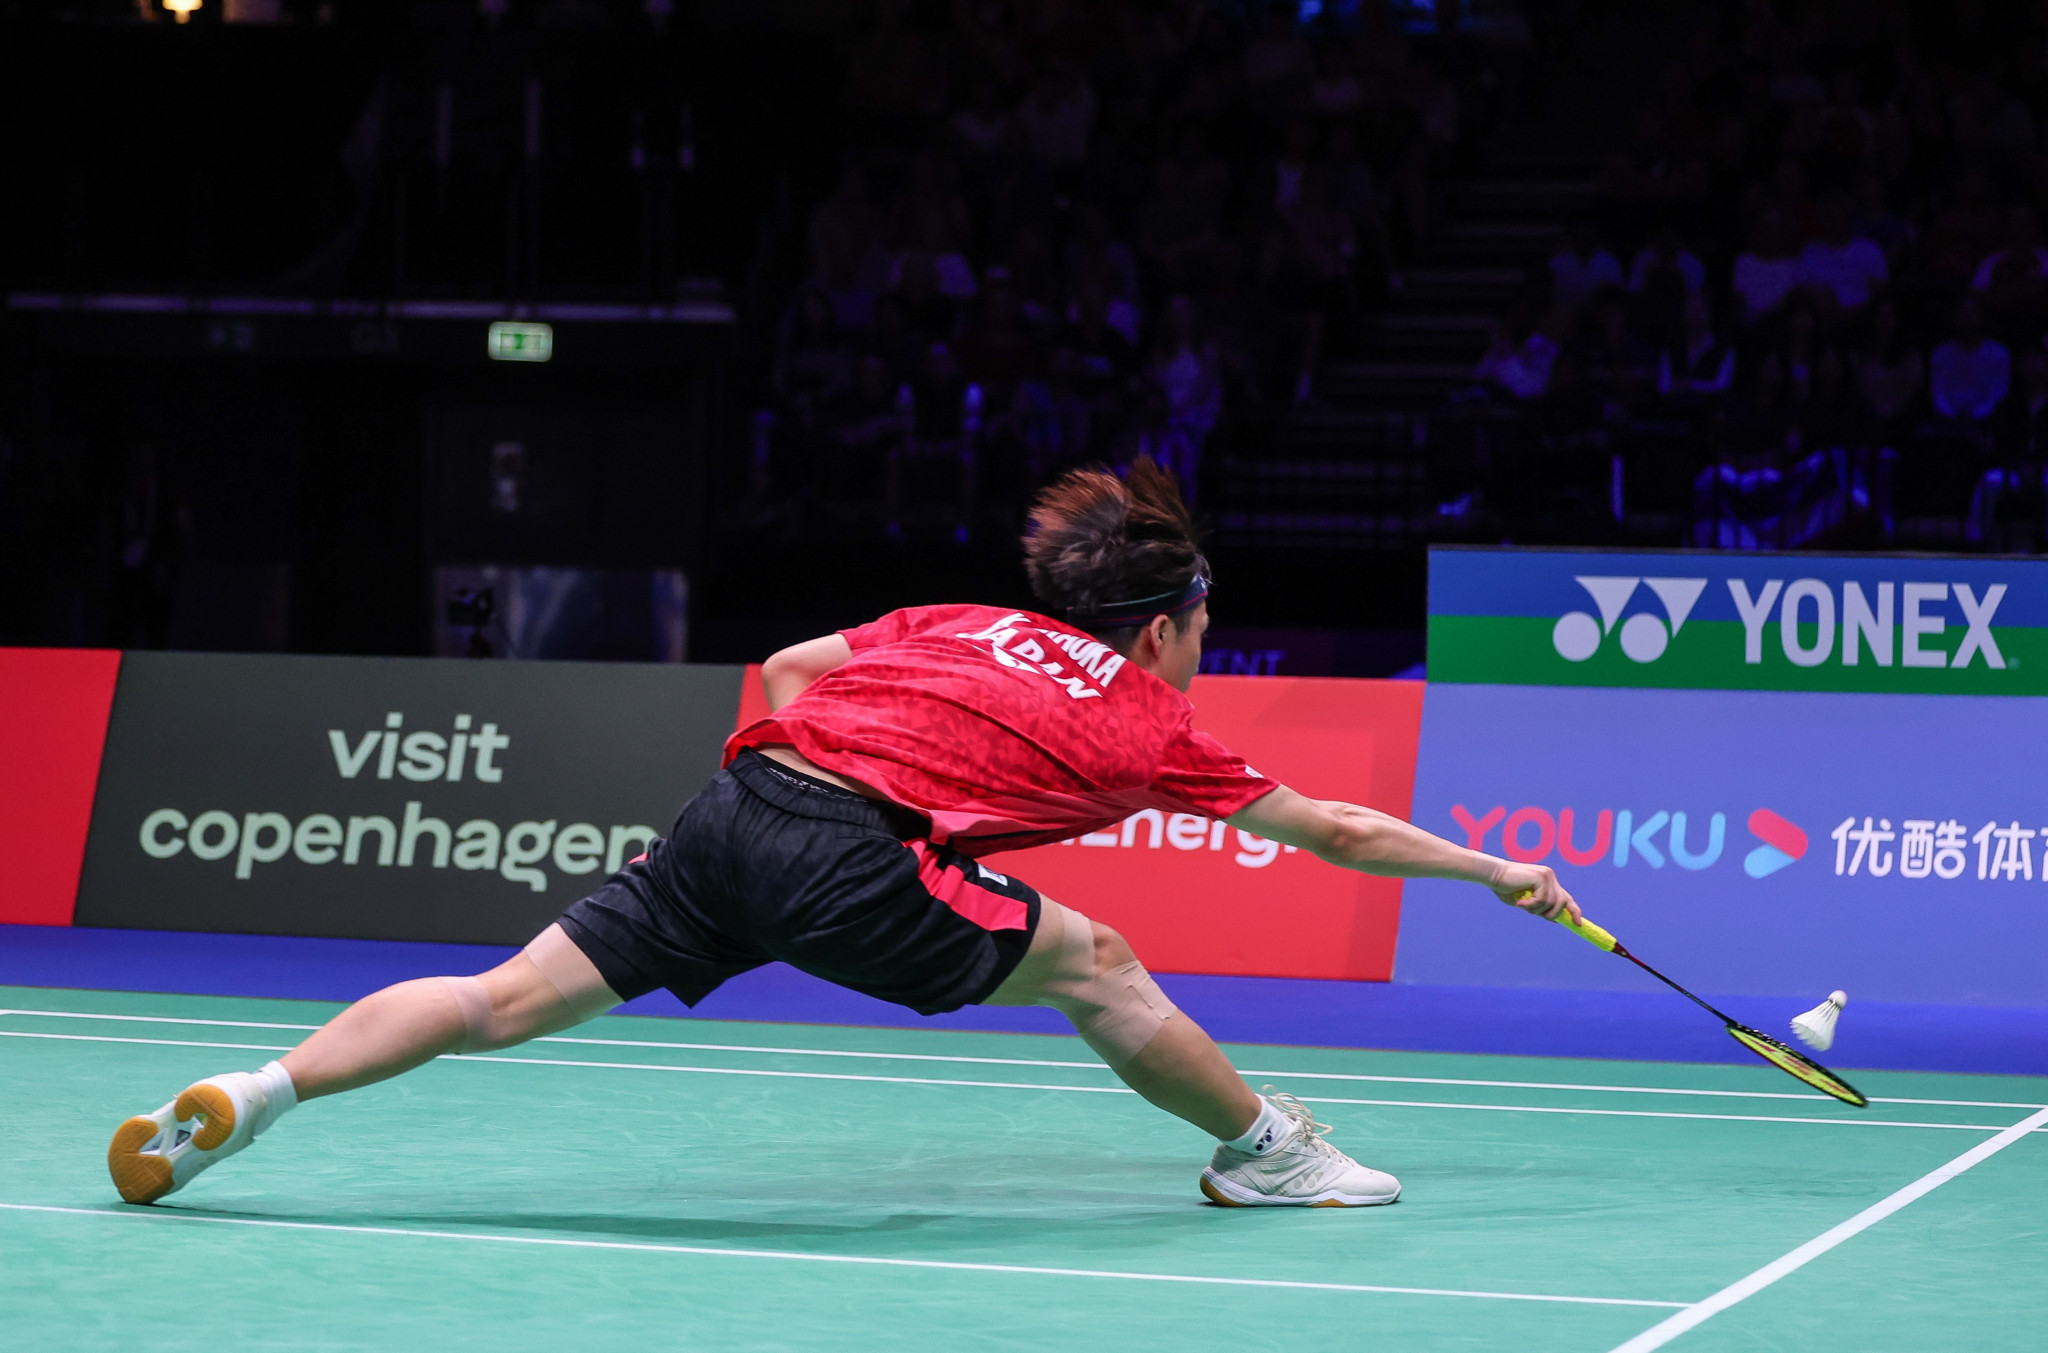 The men's singles final last more than 100 minutes with Kodai Naraoka playing his part in an attritional affair ©Badmintonphoto